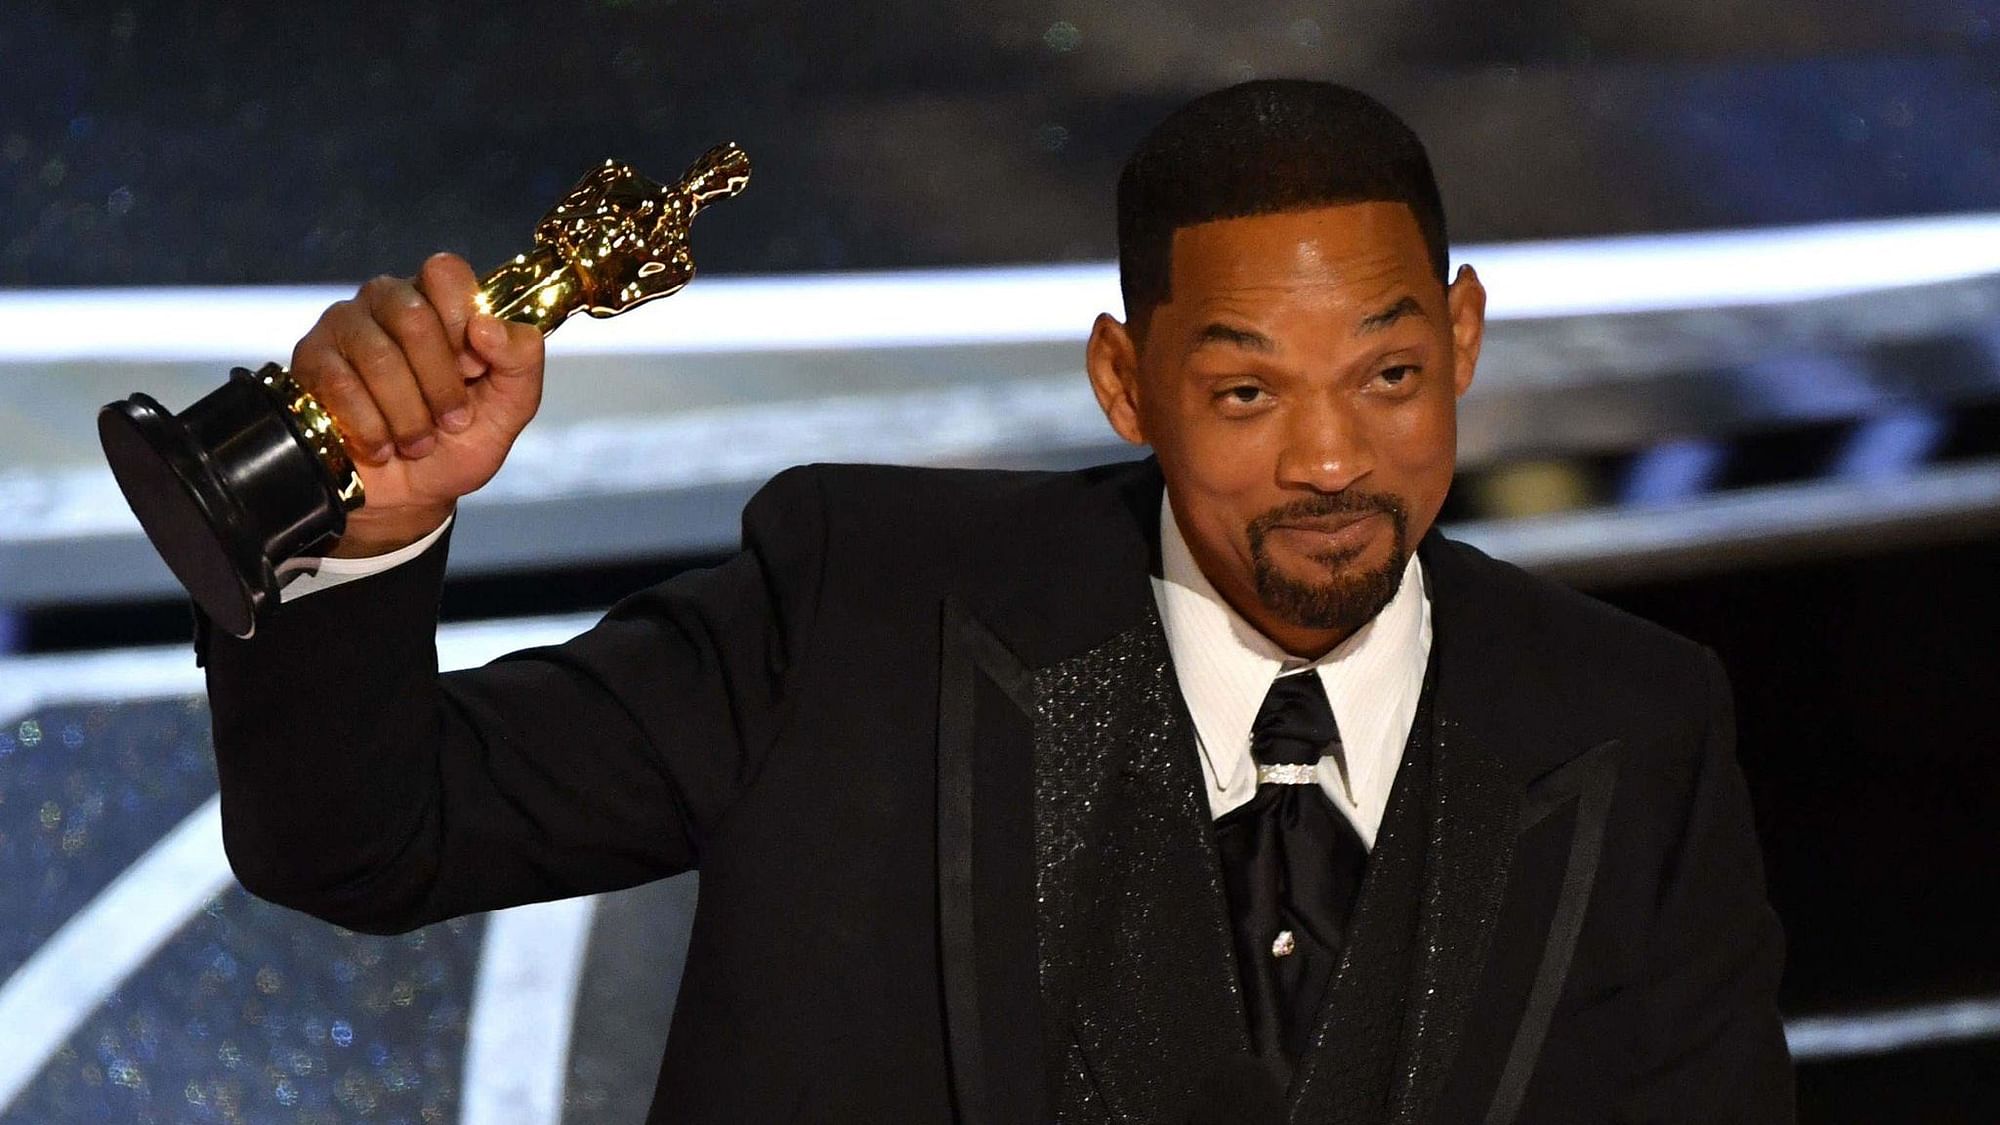 Oscars 2022: Will Smith Leaves Out Chris Rock From Apology in His Oscar Acceptance Speech